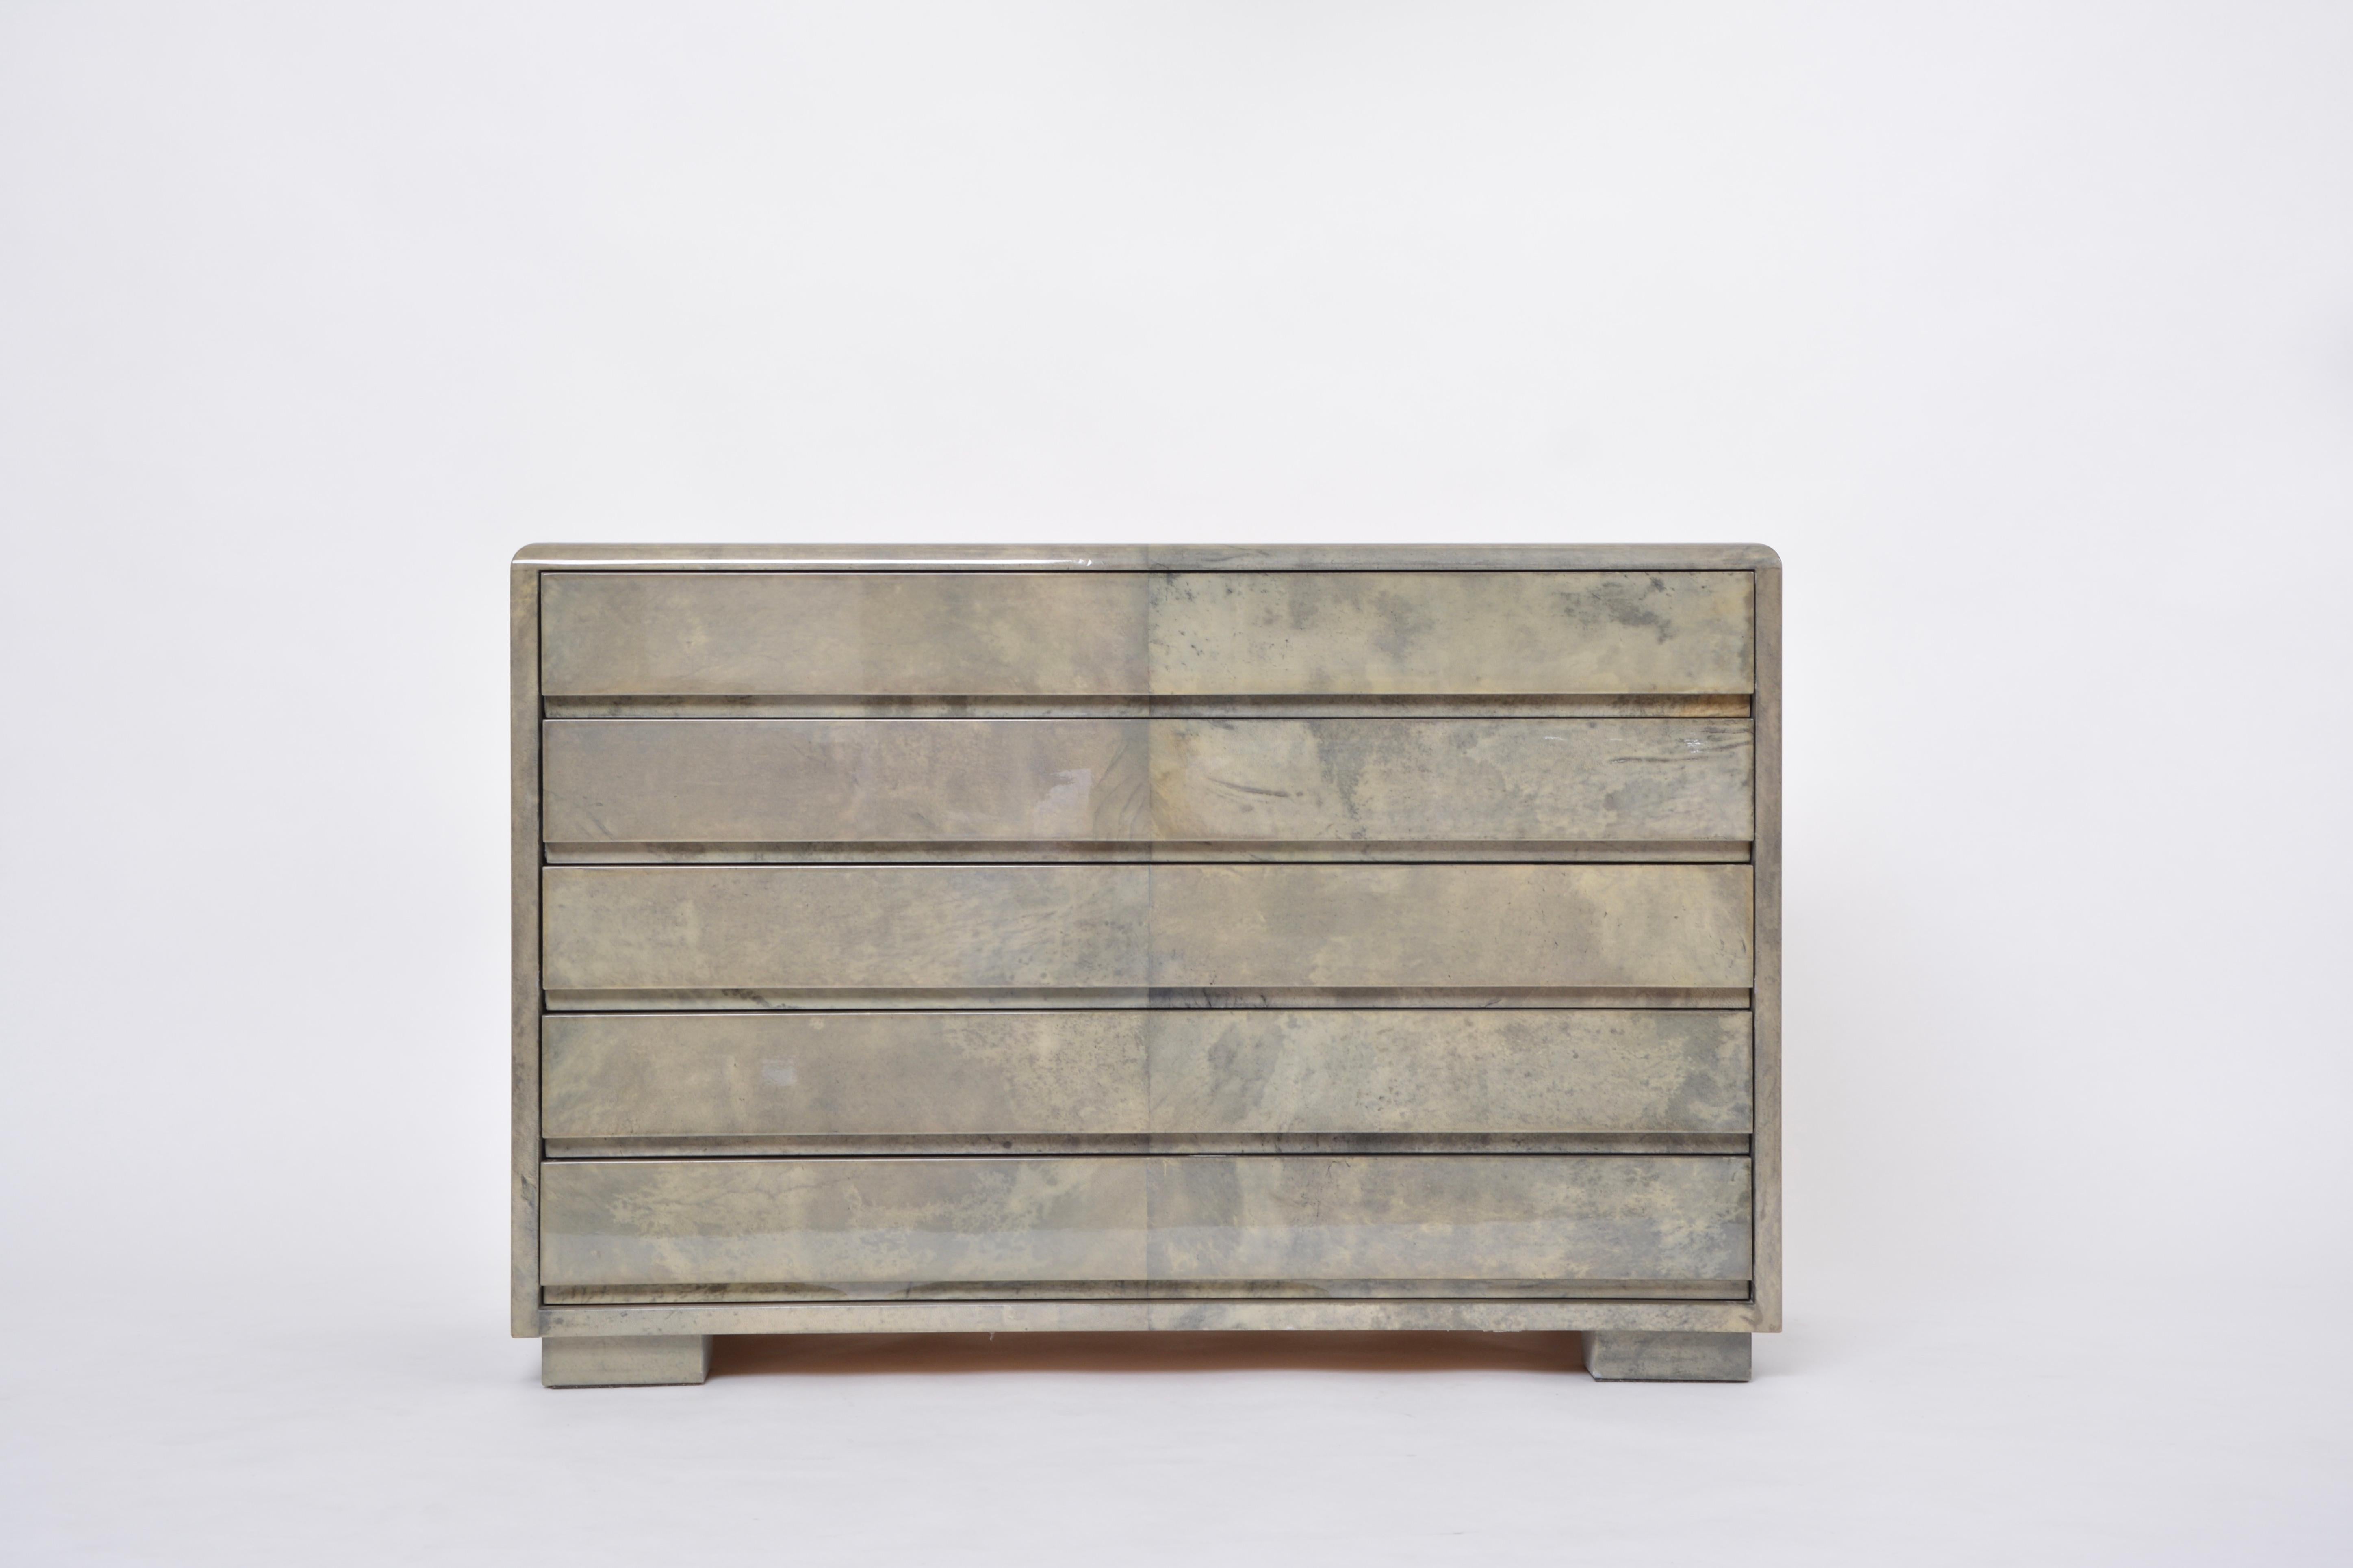 Mid-Century Modern Chest of drawers made of wood and laquered Goat Skin by Aldo Tura designed by Aldo Tura and produced in Italy approximately in the 1970s.
This chest of drawers has a wooden structure which is covered in Aldo Tura's signature style